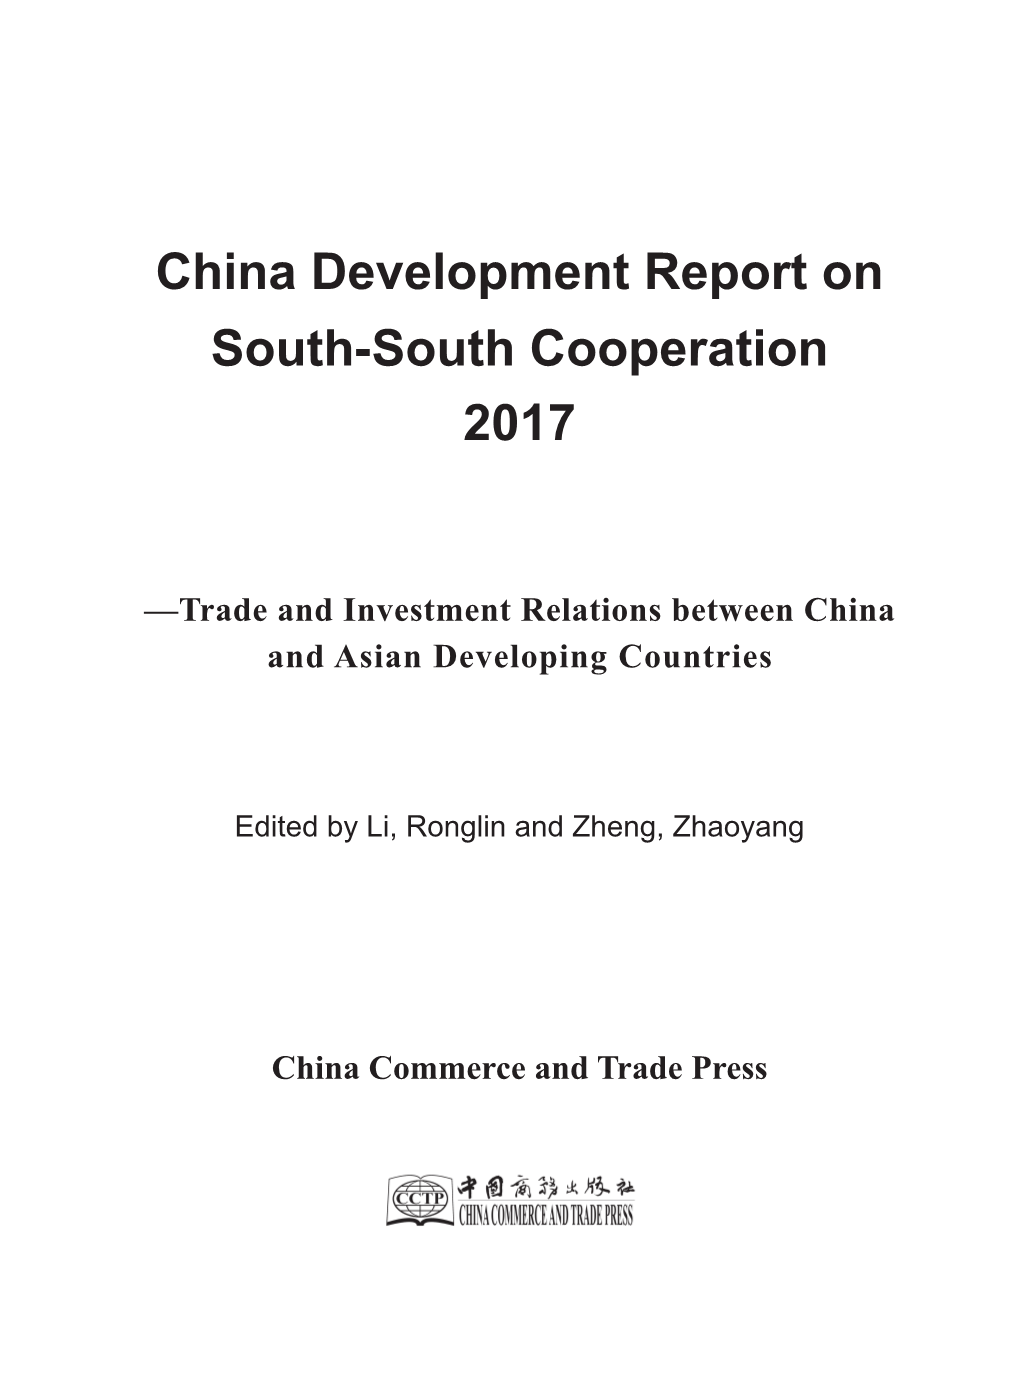 China Development Report on South-South Cooperation 2017